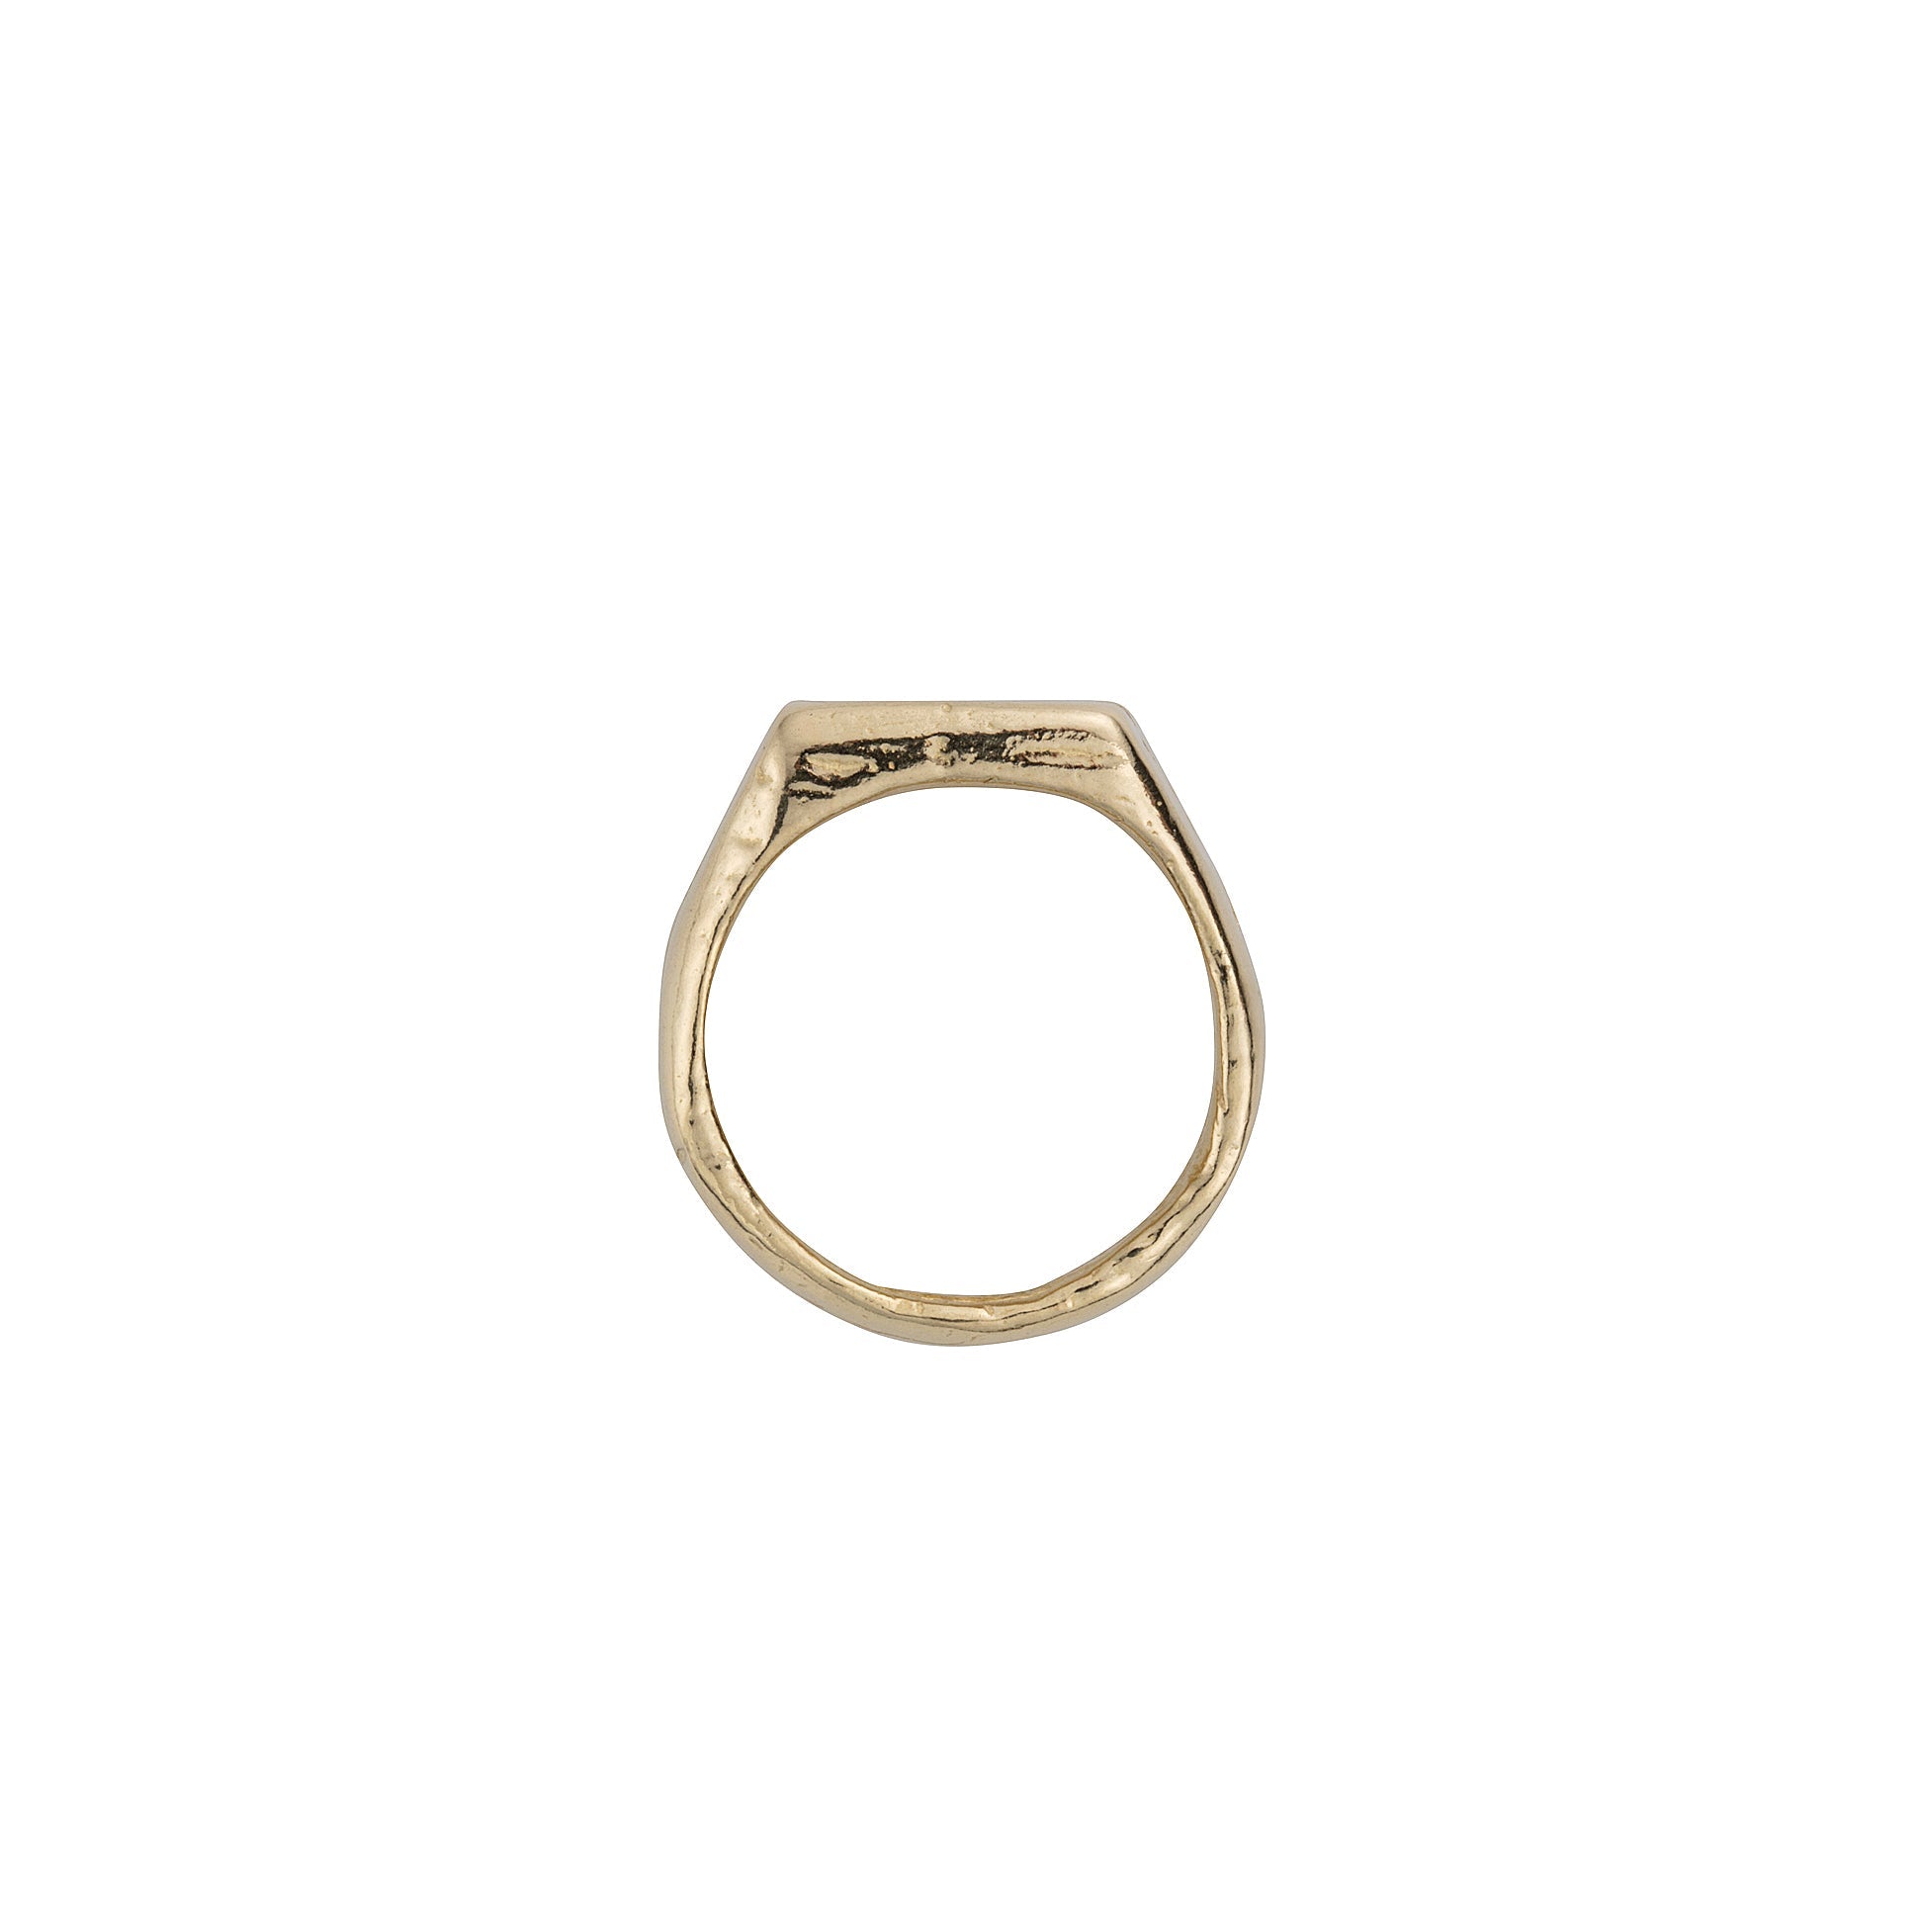 Gold Square Signet Ring